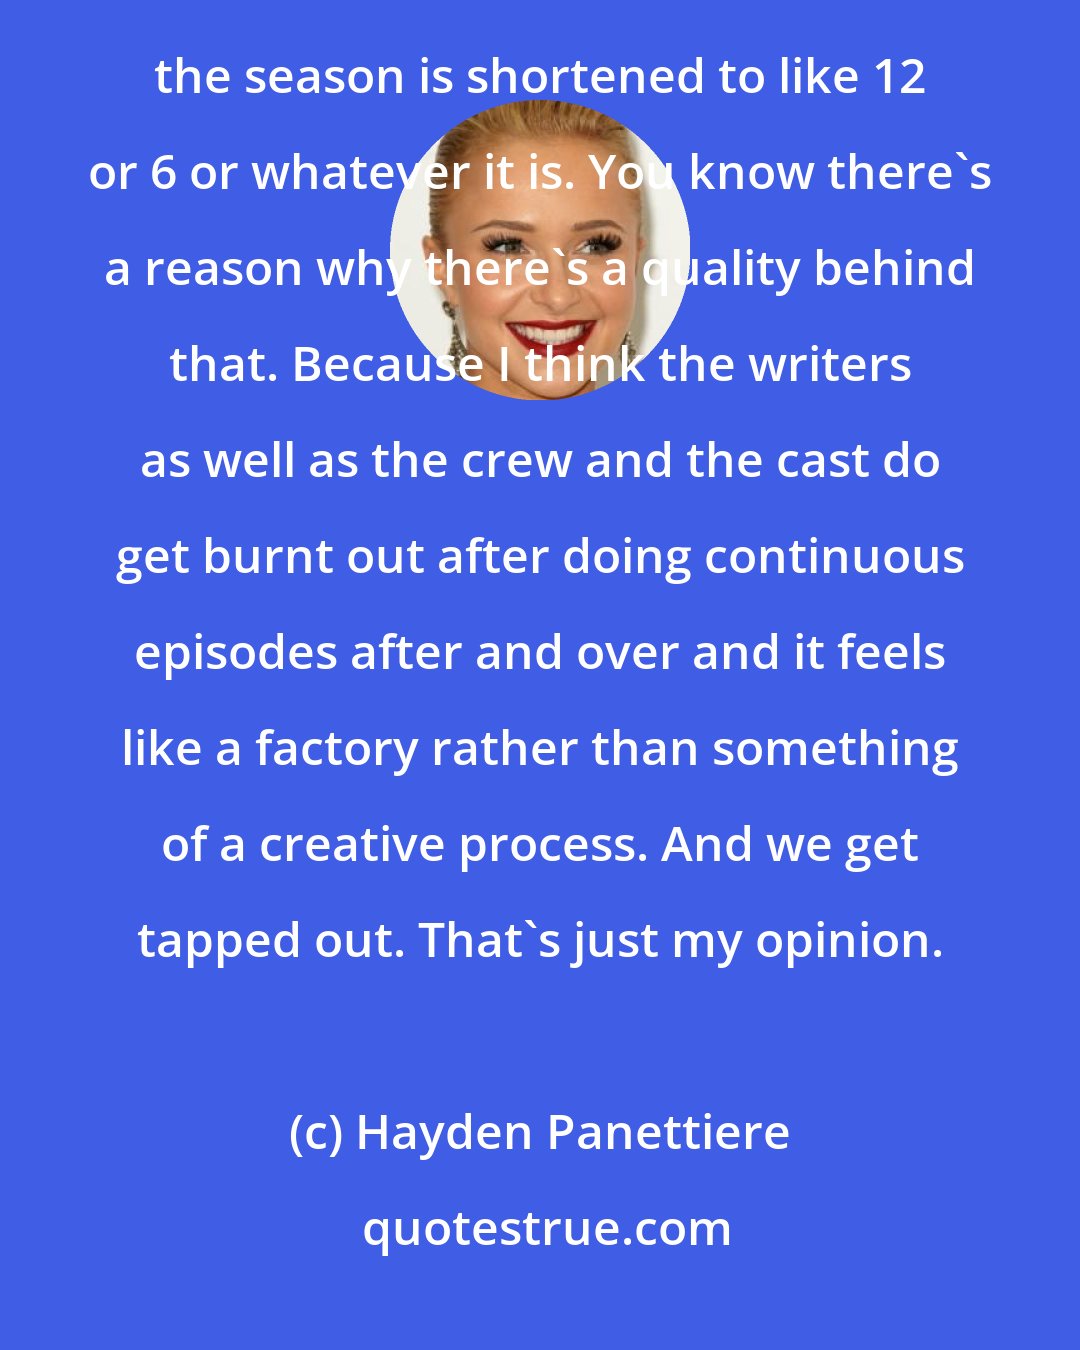 Hayden Panettiere: That's the one thing I say about the great British shows. You know, I see it on the series on HBO where the season is shortened to like 12 or 6 or whatever it is. You know there's a reason why there's a quality behind that. Because I think the writers as well as the crew and the cast do get burnt out after doing continuous episodes after and over and it feels like a factory rather than something of a creative process. And we get tapped out. That's just my opinion.